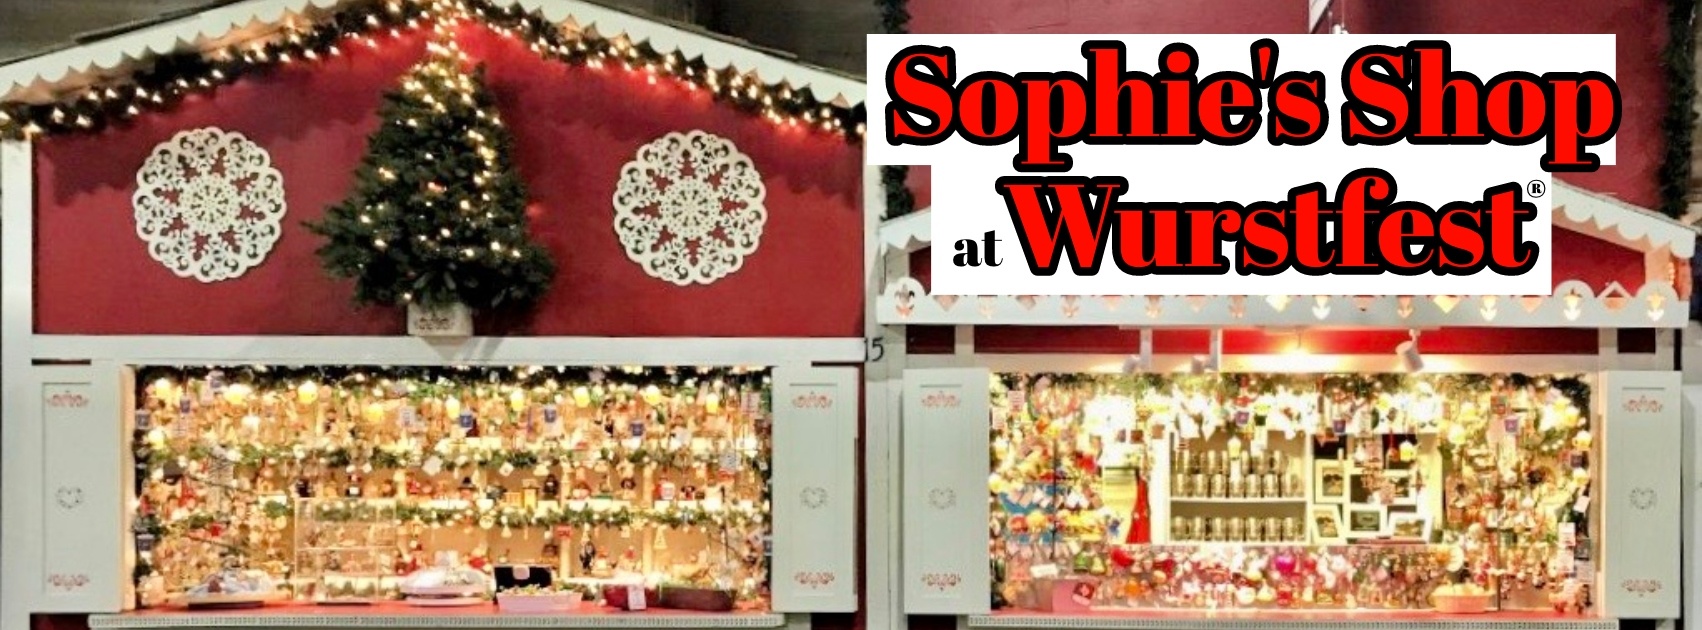 Sophie's Shop Booth